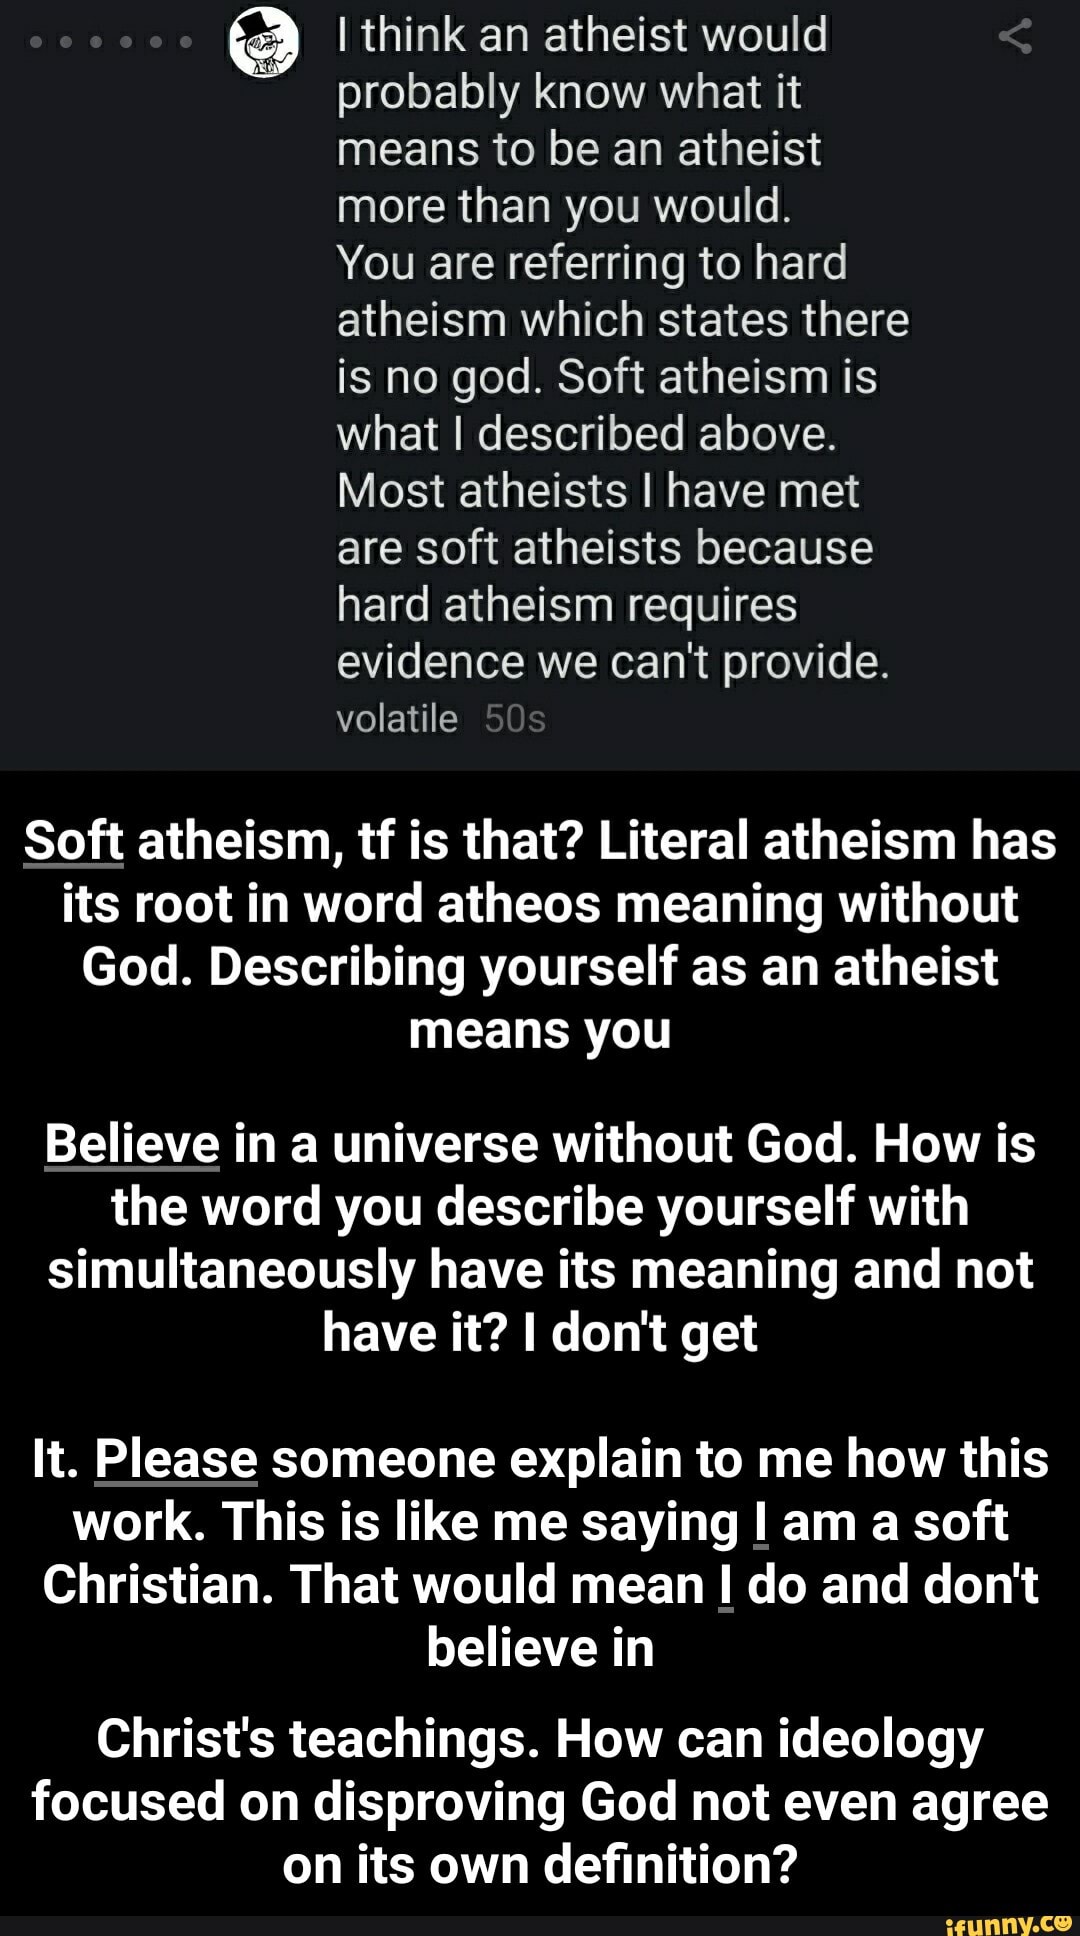 4 I think an atheist would probably know what it means to be an atheist ...